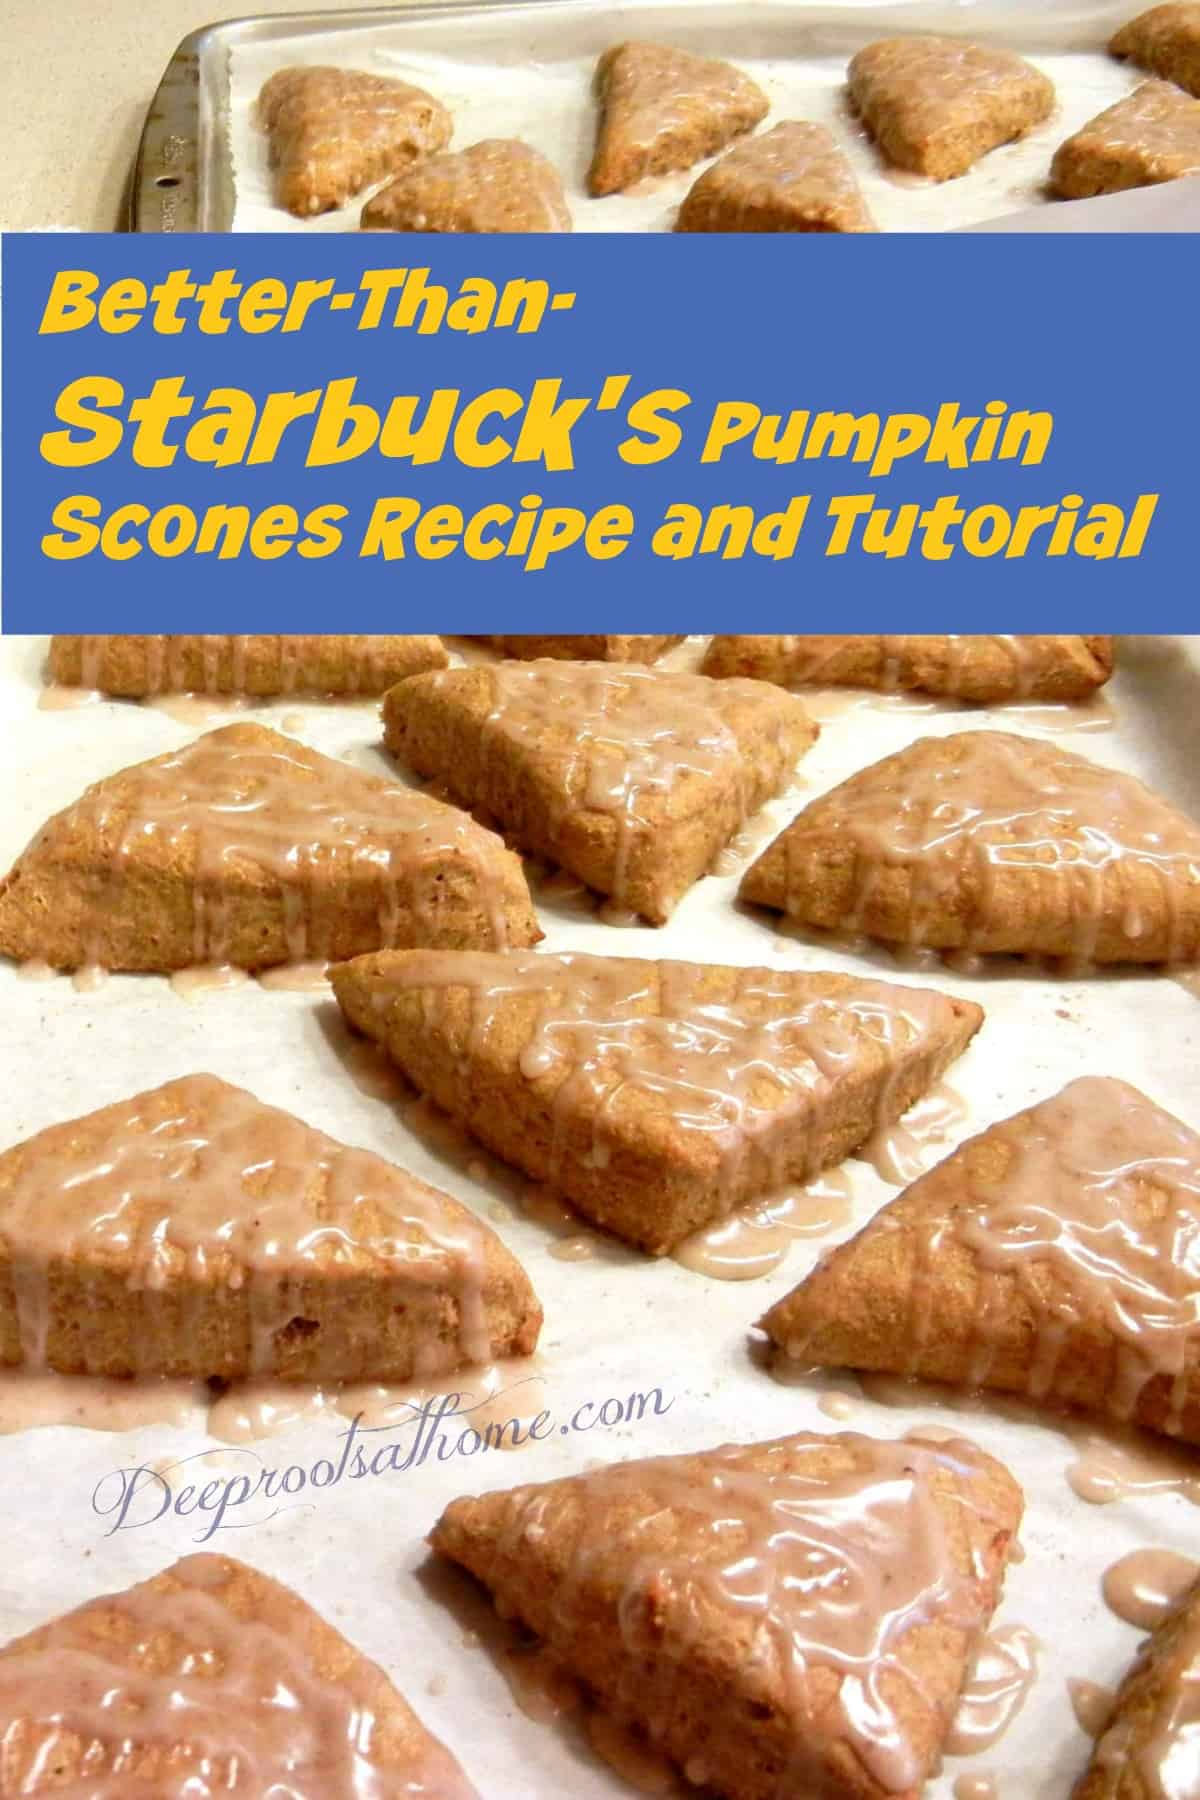 Better-Than-Starbuck's Pumpkin Scones Recipe and Tutorial. Baking sheets of fresh scones just out of the oven. 